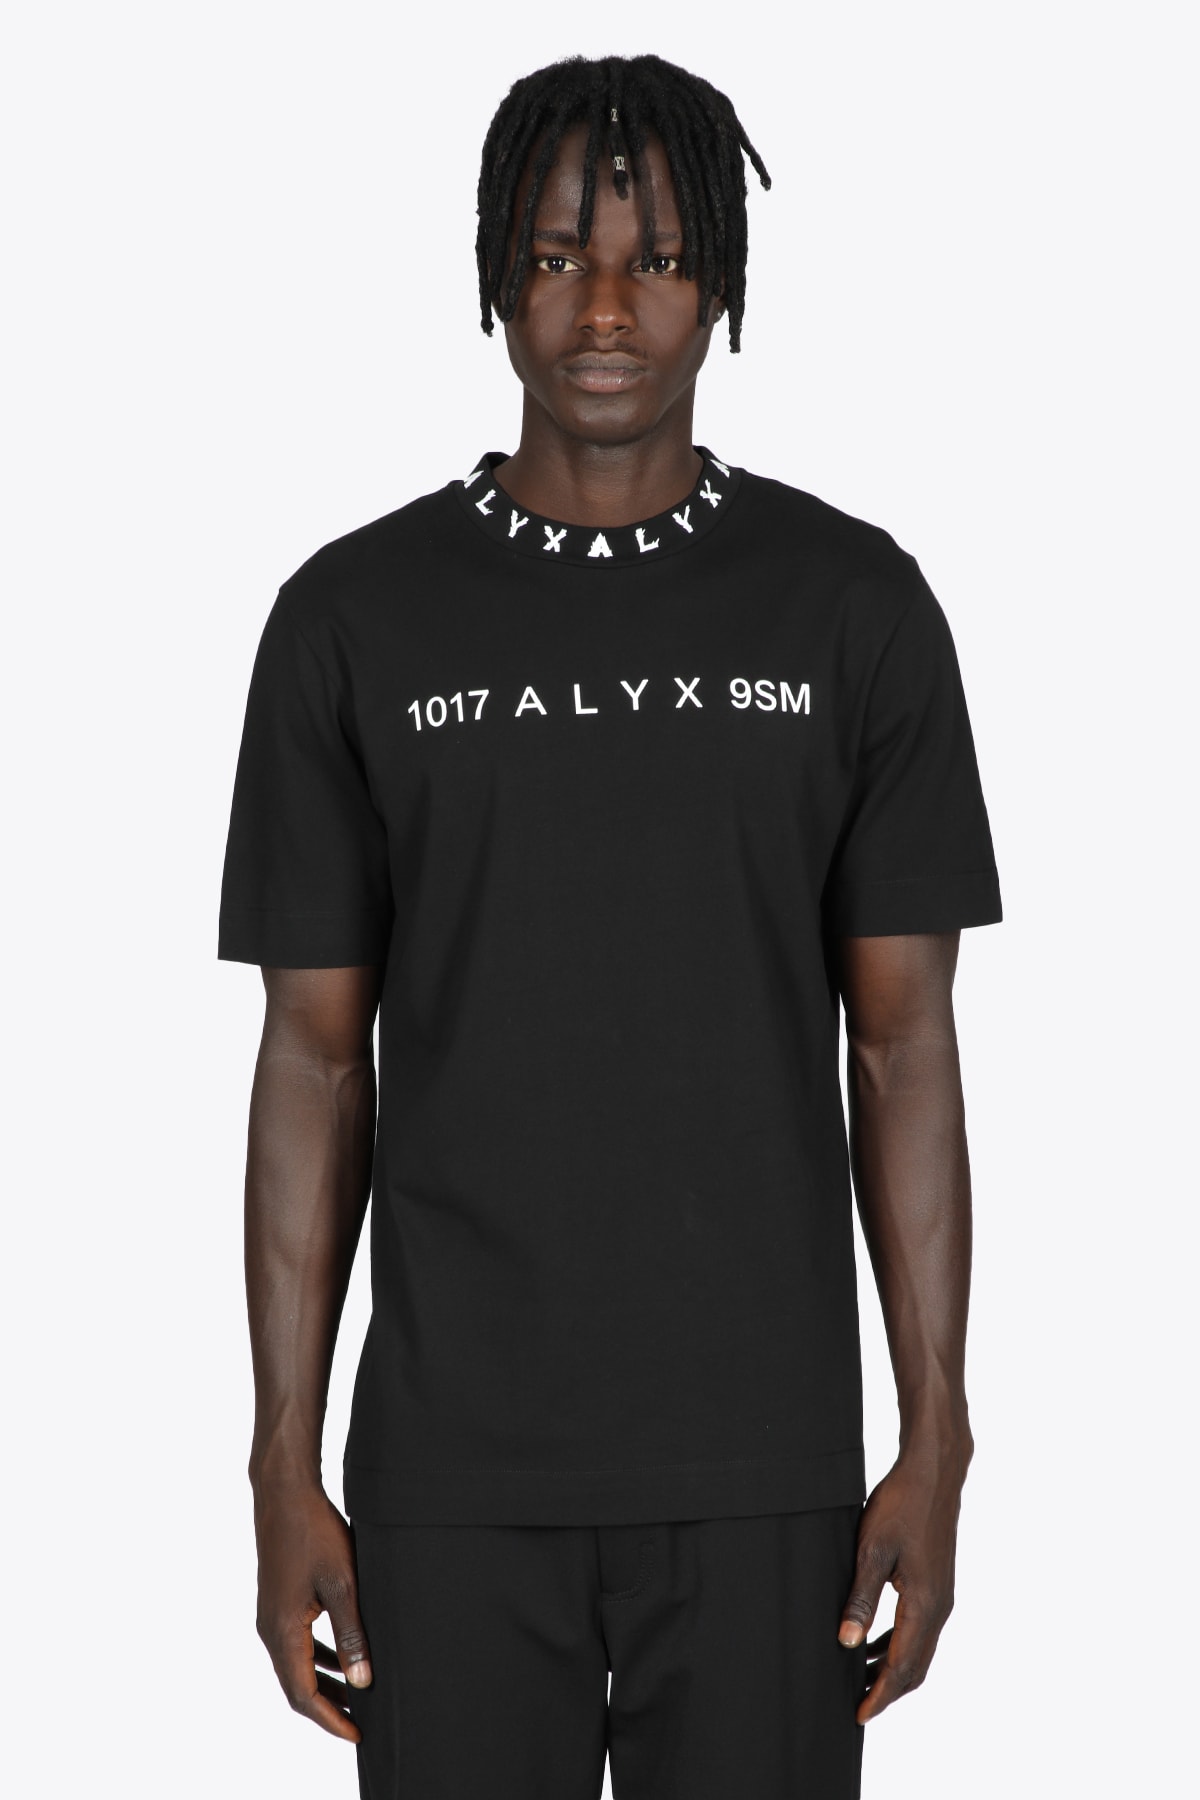 1017 ALYX 9SM S/s Graphic T-shirt Black Cotton T-shirt With Logo At Collar - S/s Graphic T-shirt